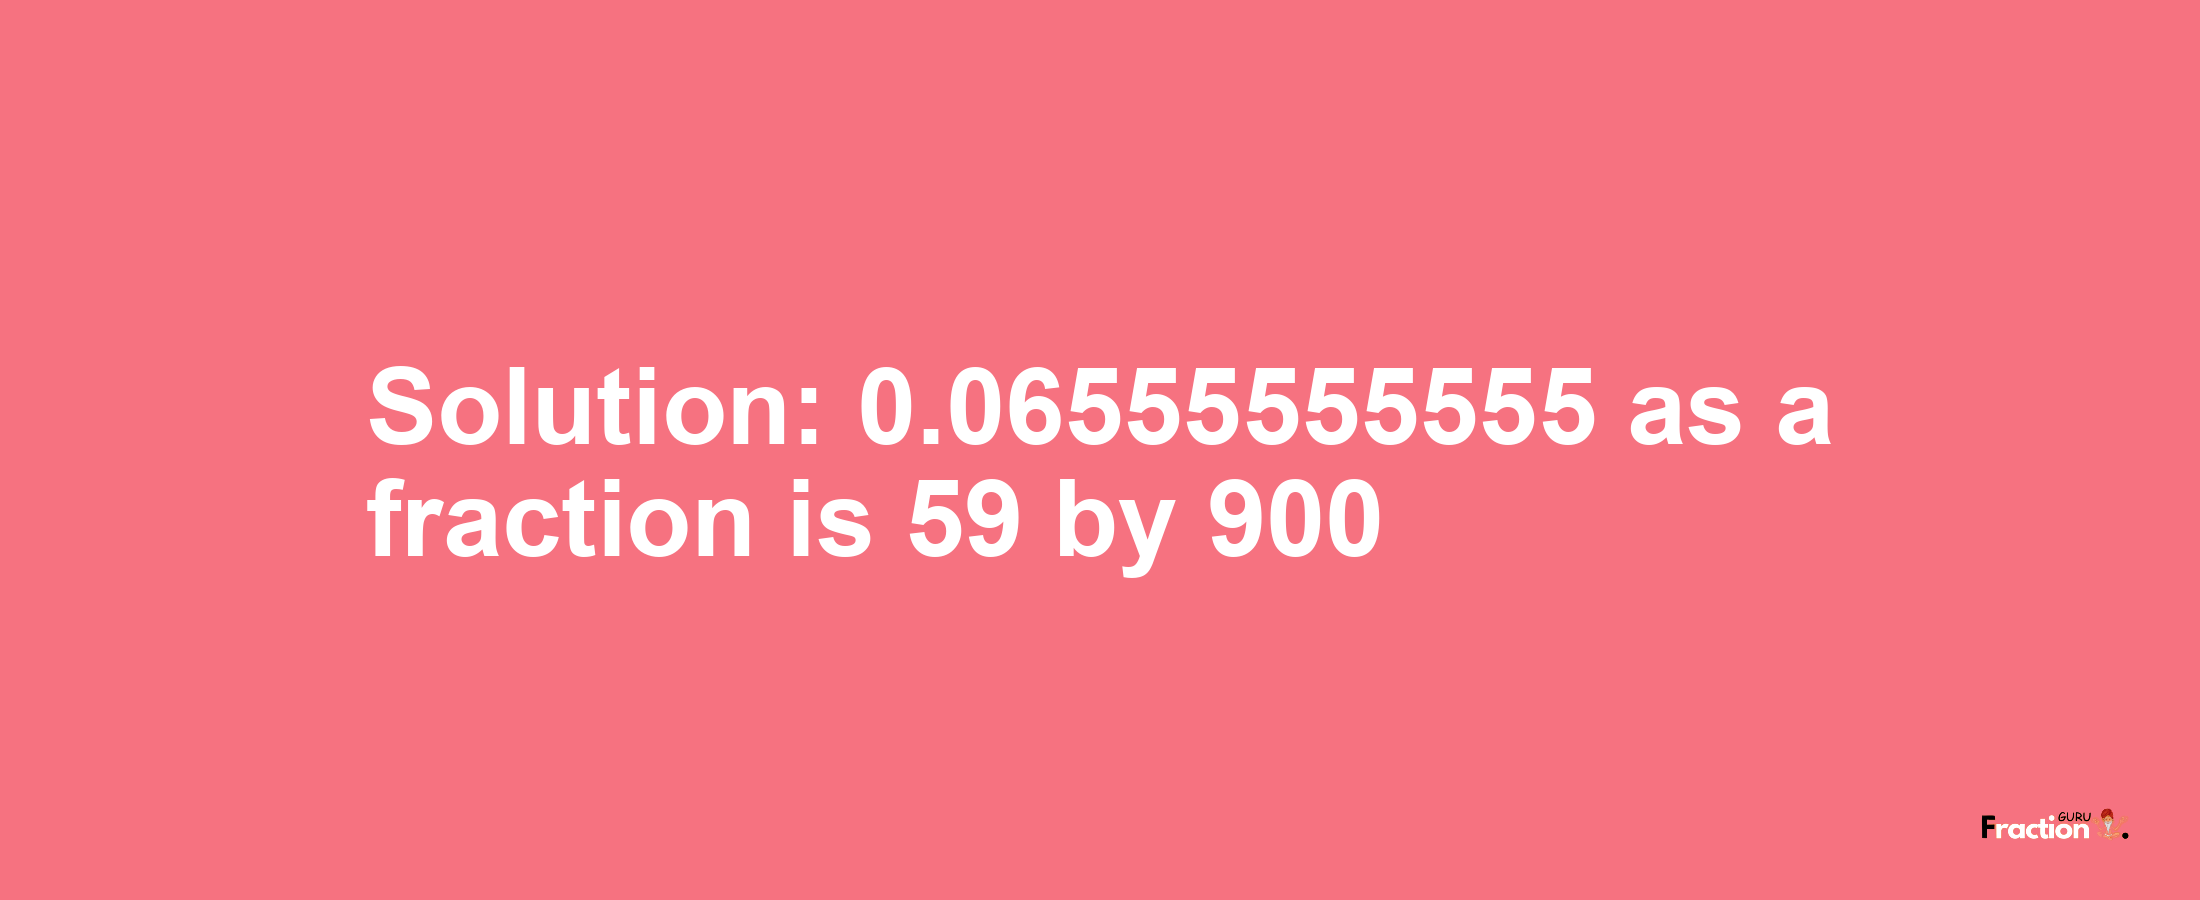 Solution:0.06555555555 as a fraction is 59/900